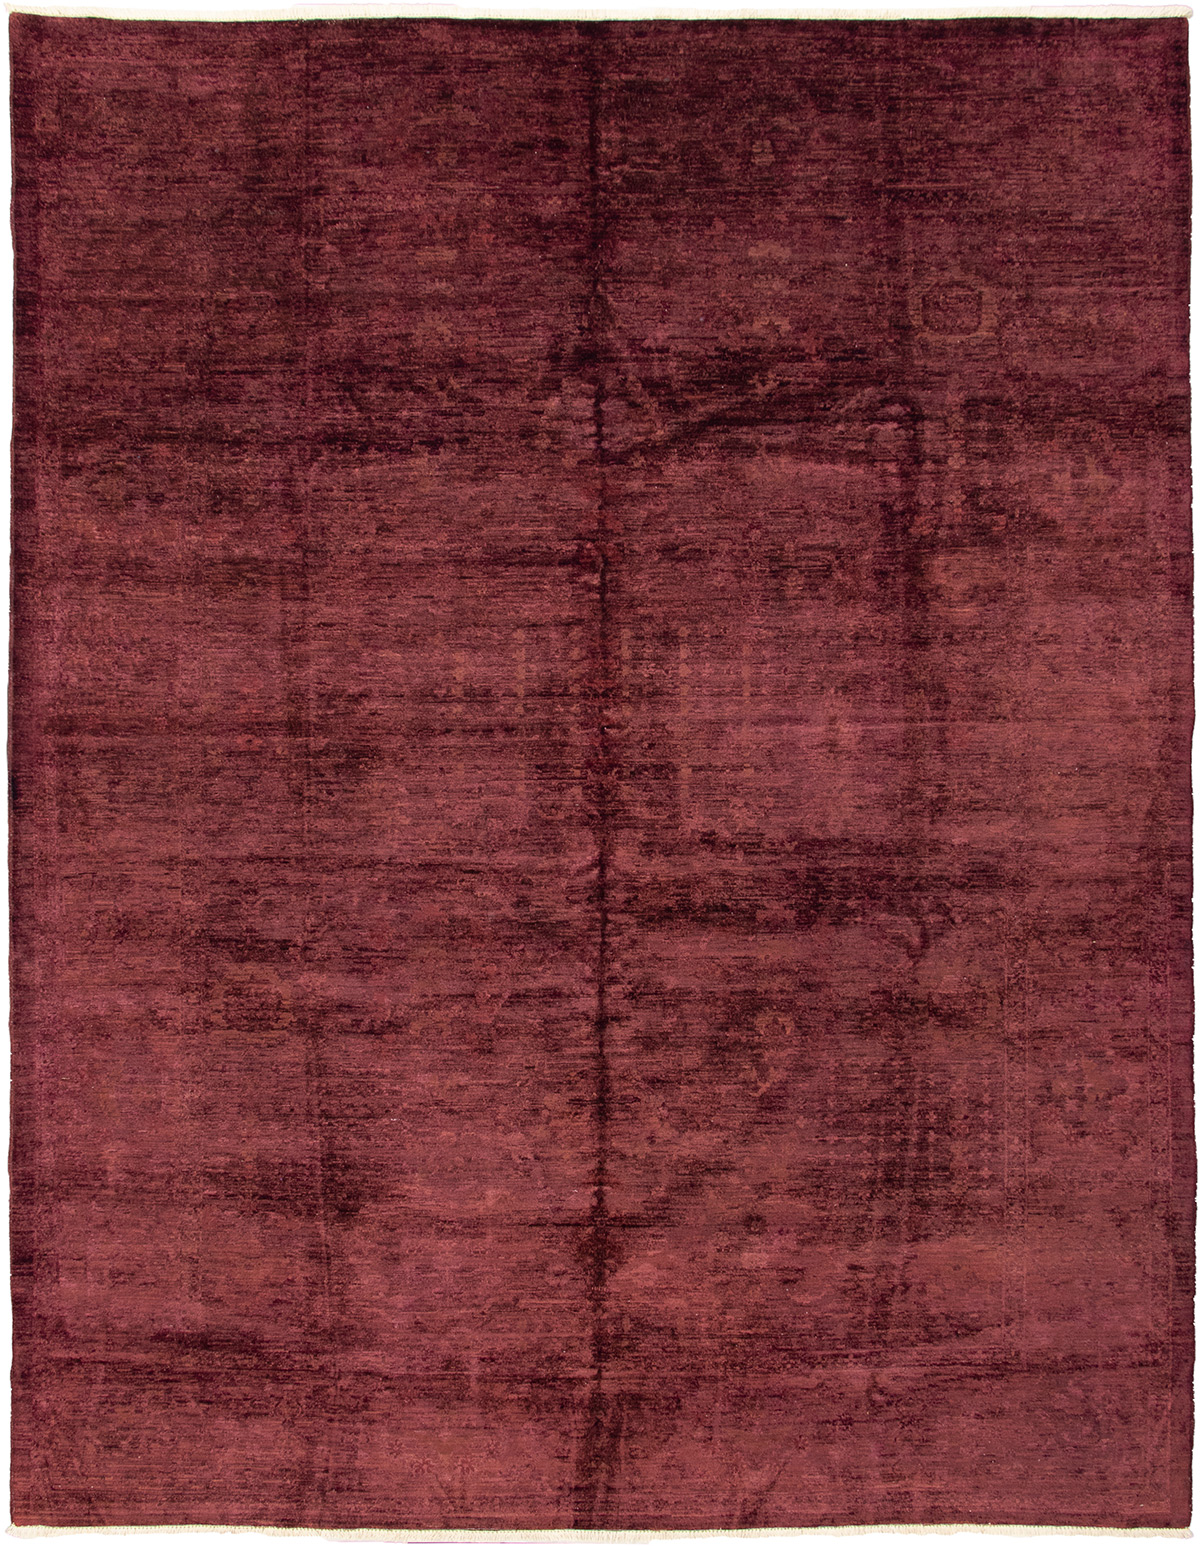 Hand-knotted Color transition Dark Burgundy Wool Rug 9'1" x 11'10" Size: 9'1" x 11'10"  